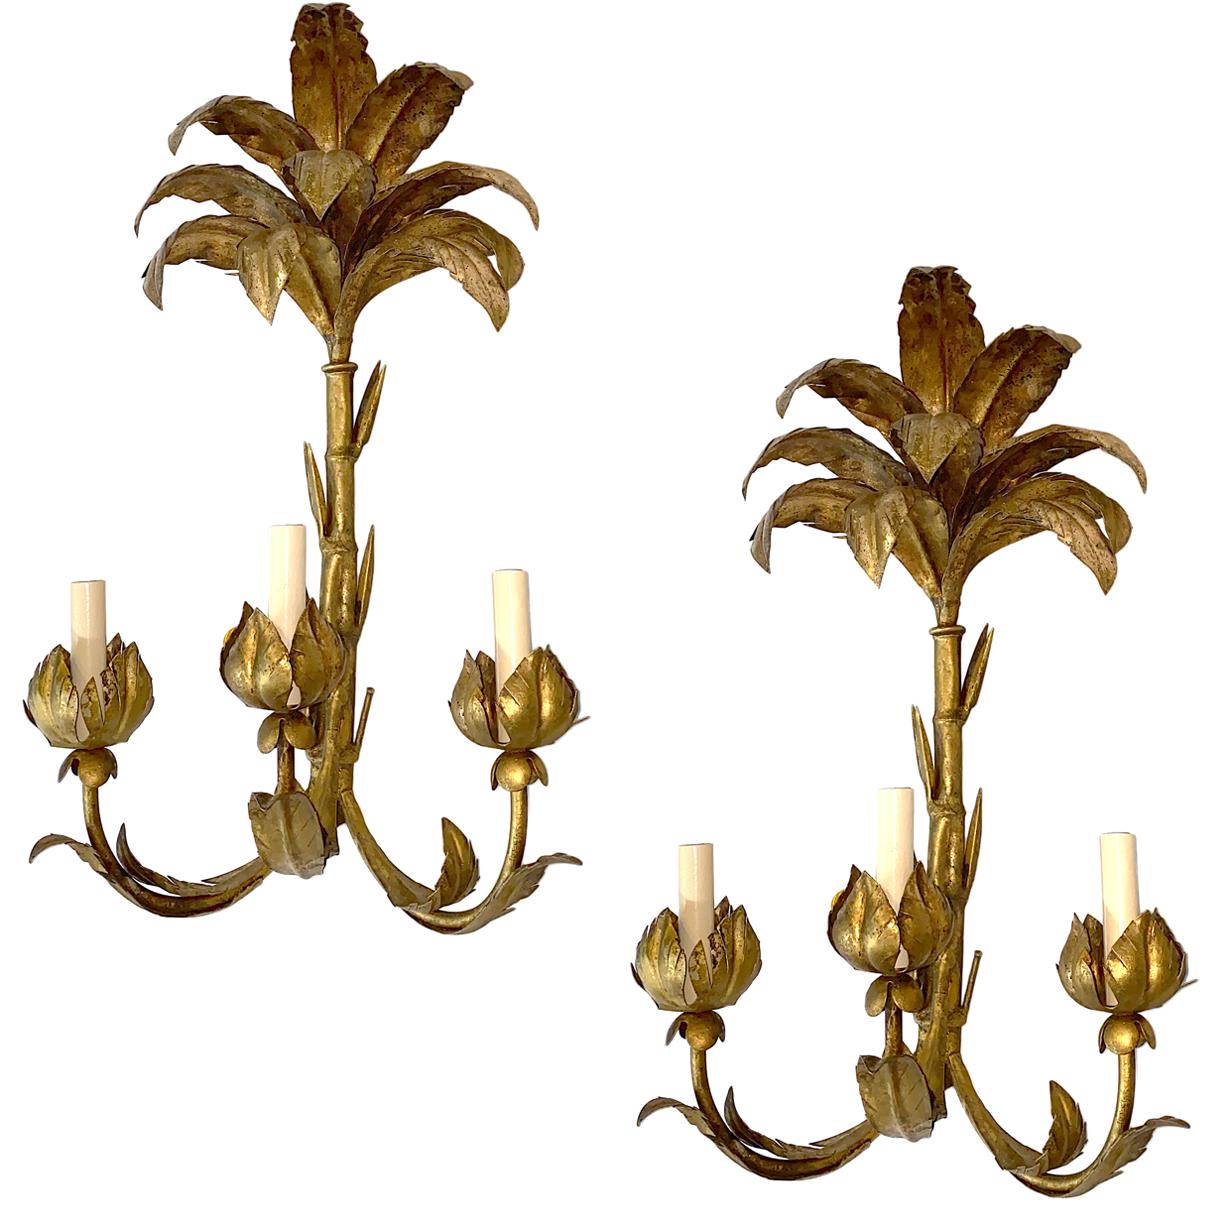 Set of four large Italian gilt metal palm frond-shaped sconces with 3 lights each with original patina. Sold in Pairs.

Measurements:
Height: 23